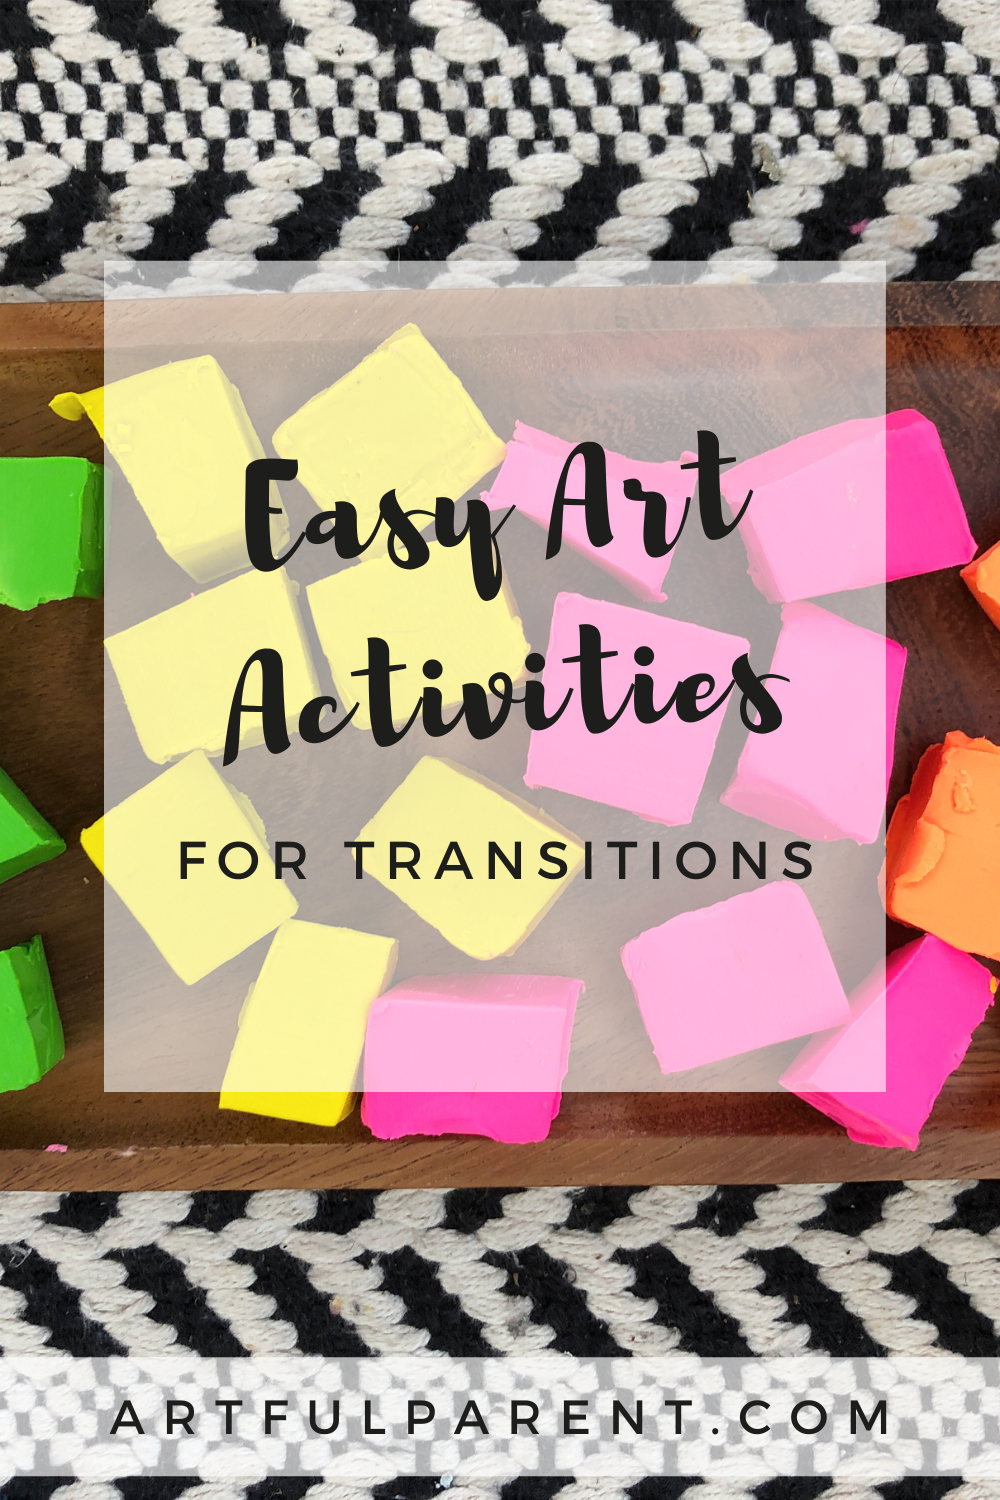 13 Easy Art Activities for Transitions